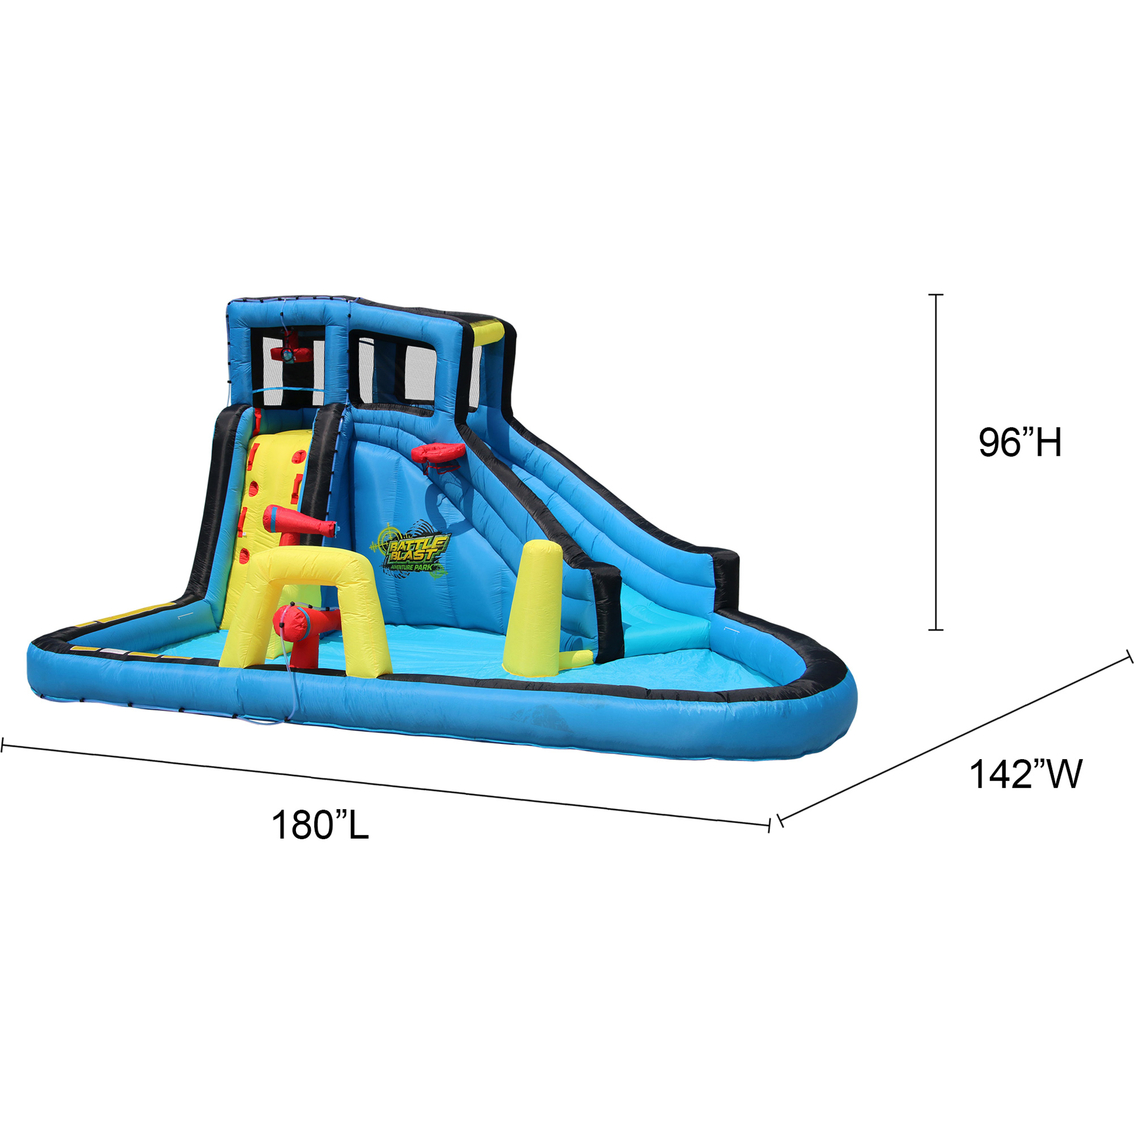 Banzai Battle Blast Inflatable Water Park Play Center - Image 9 of 9